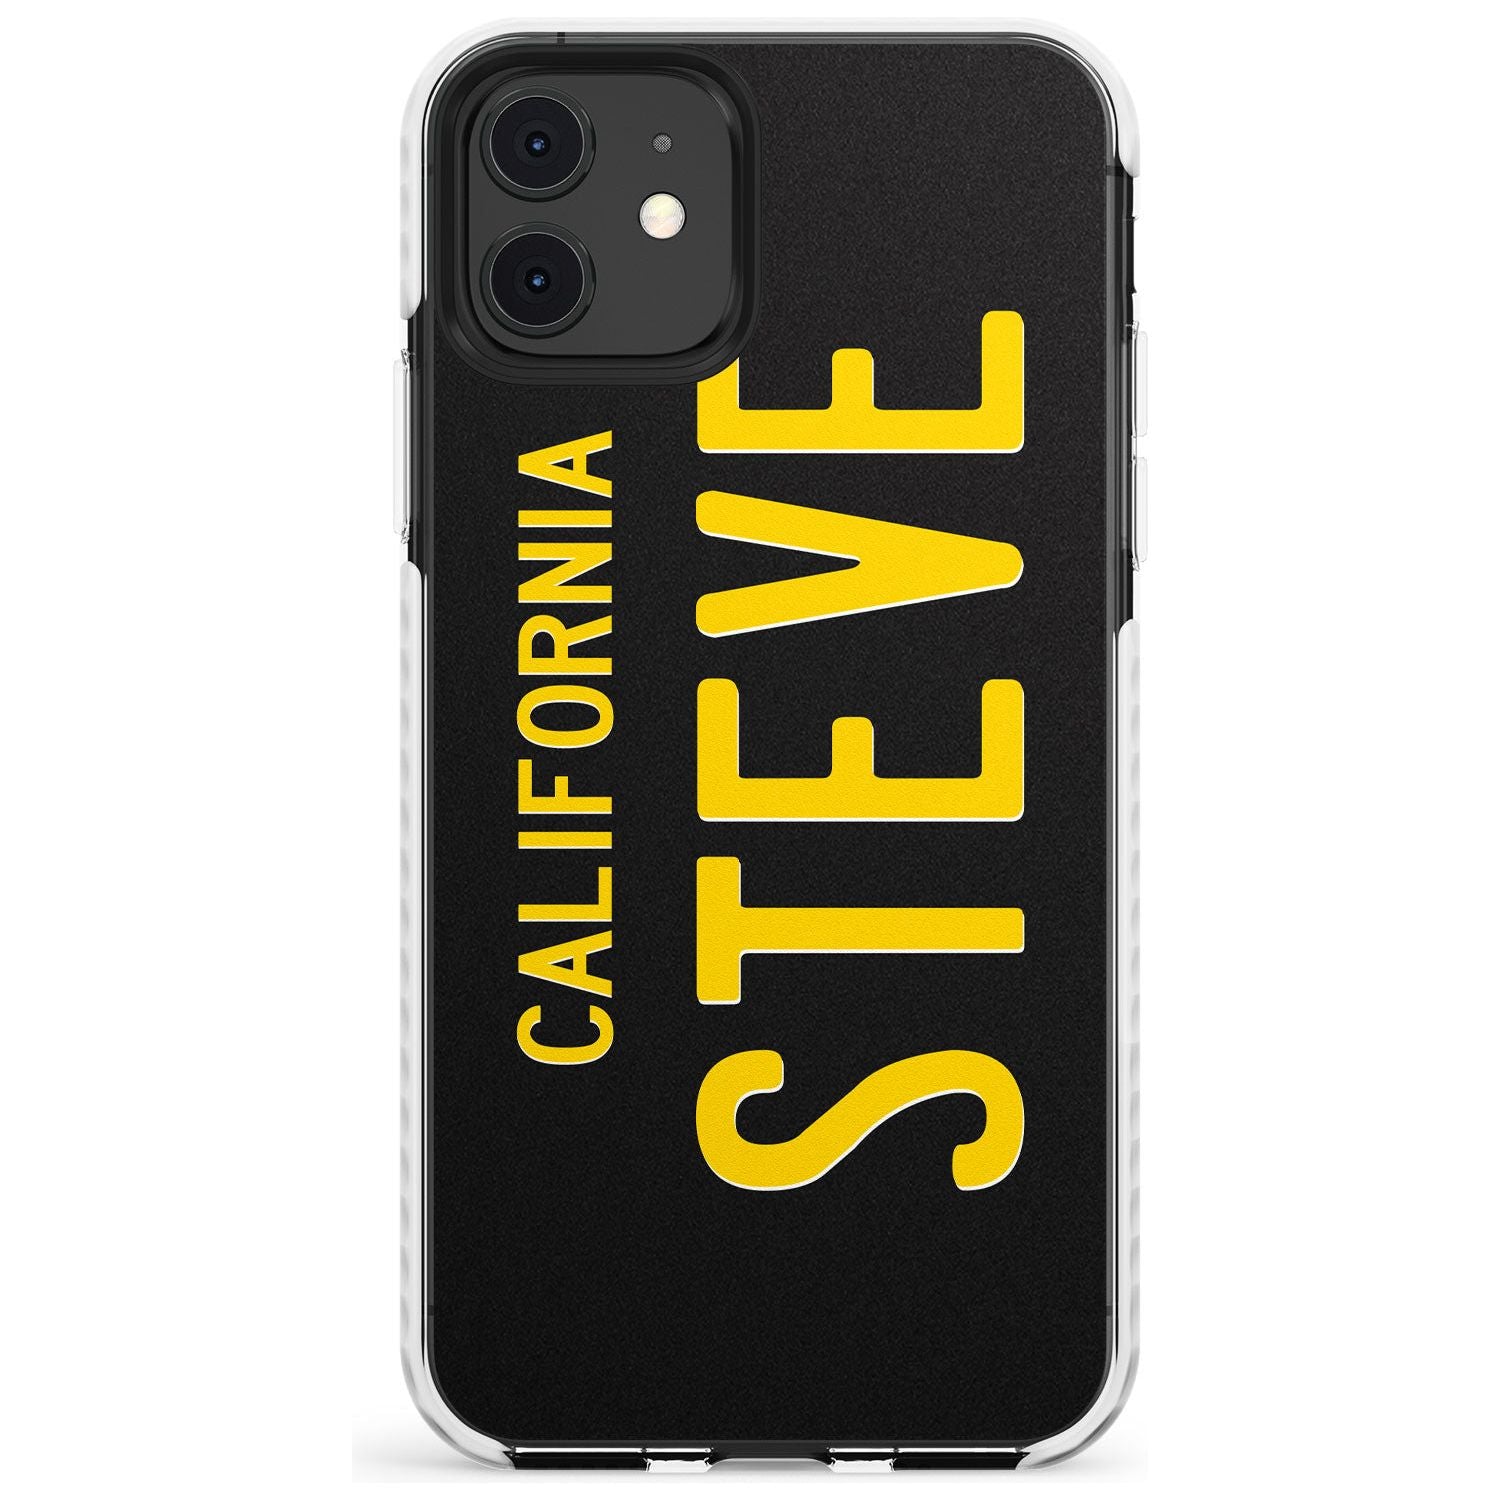 Vintage California License Plate Slim TPU Phone Case for iPhone 11